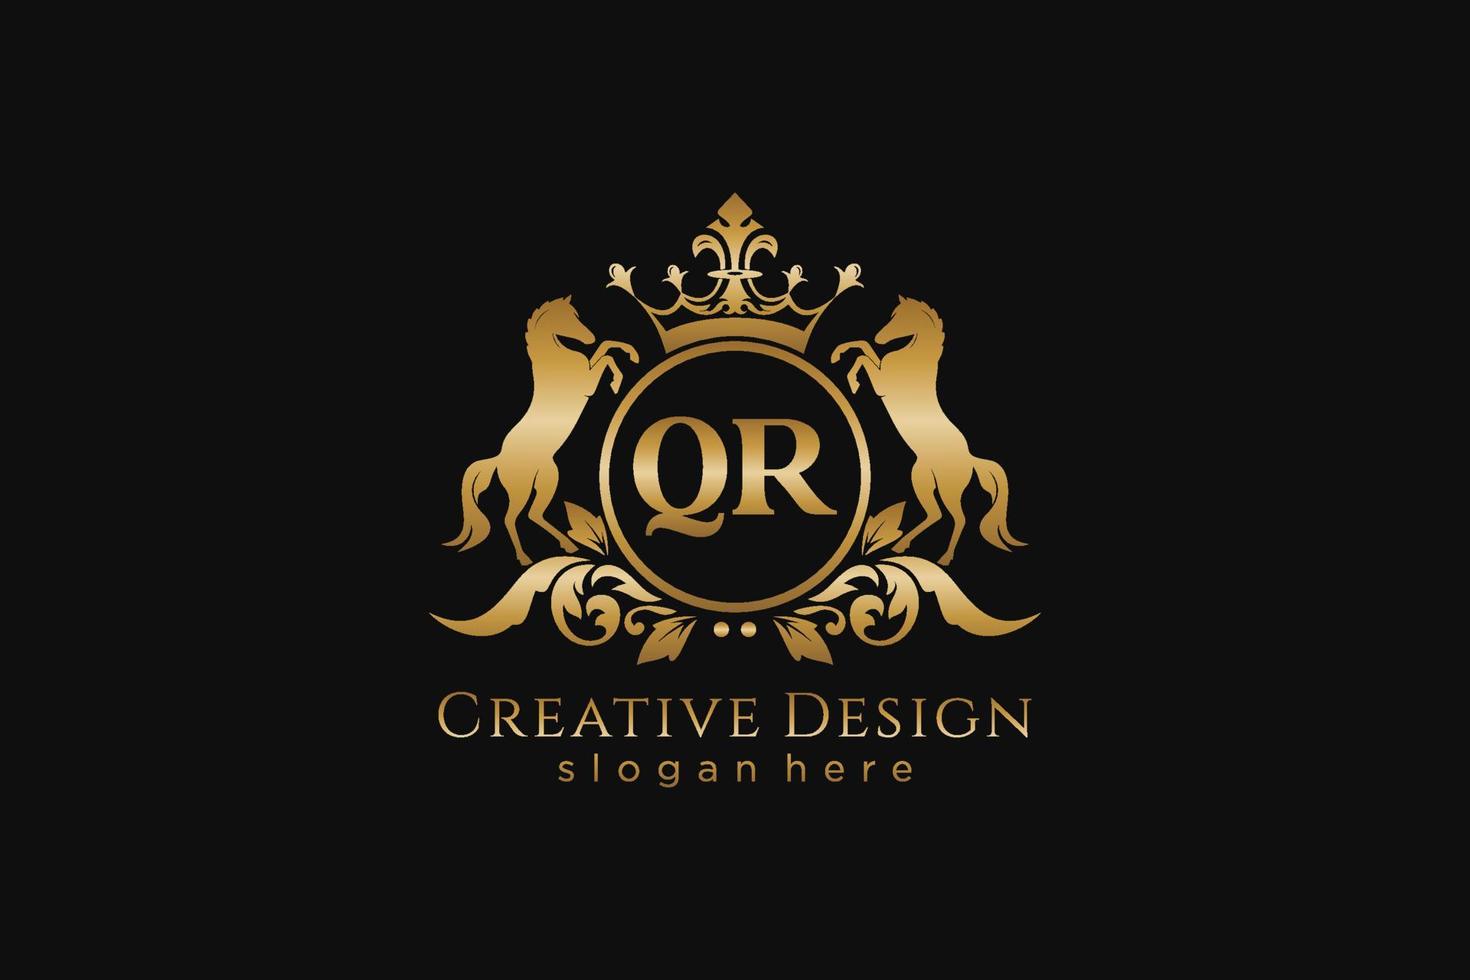 initial QR Retro golden crest with circle and two horses, badge template with scrolls and royal crown - perfect for luxurious branding projects vector